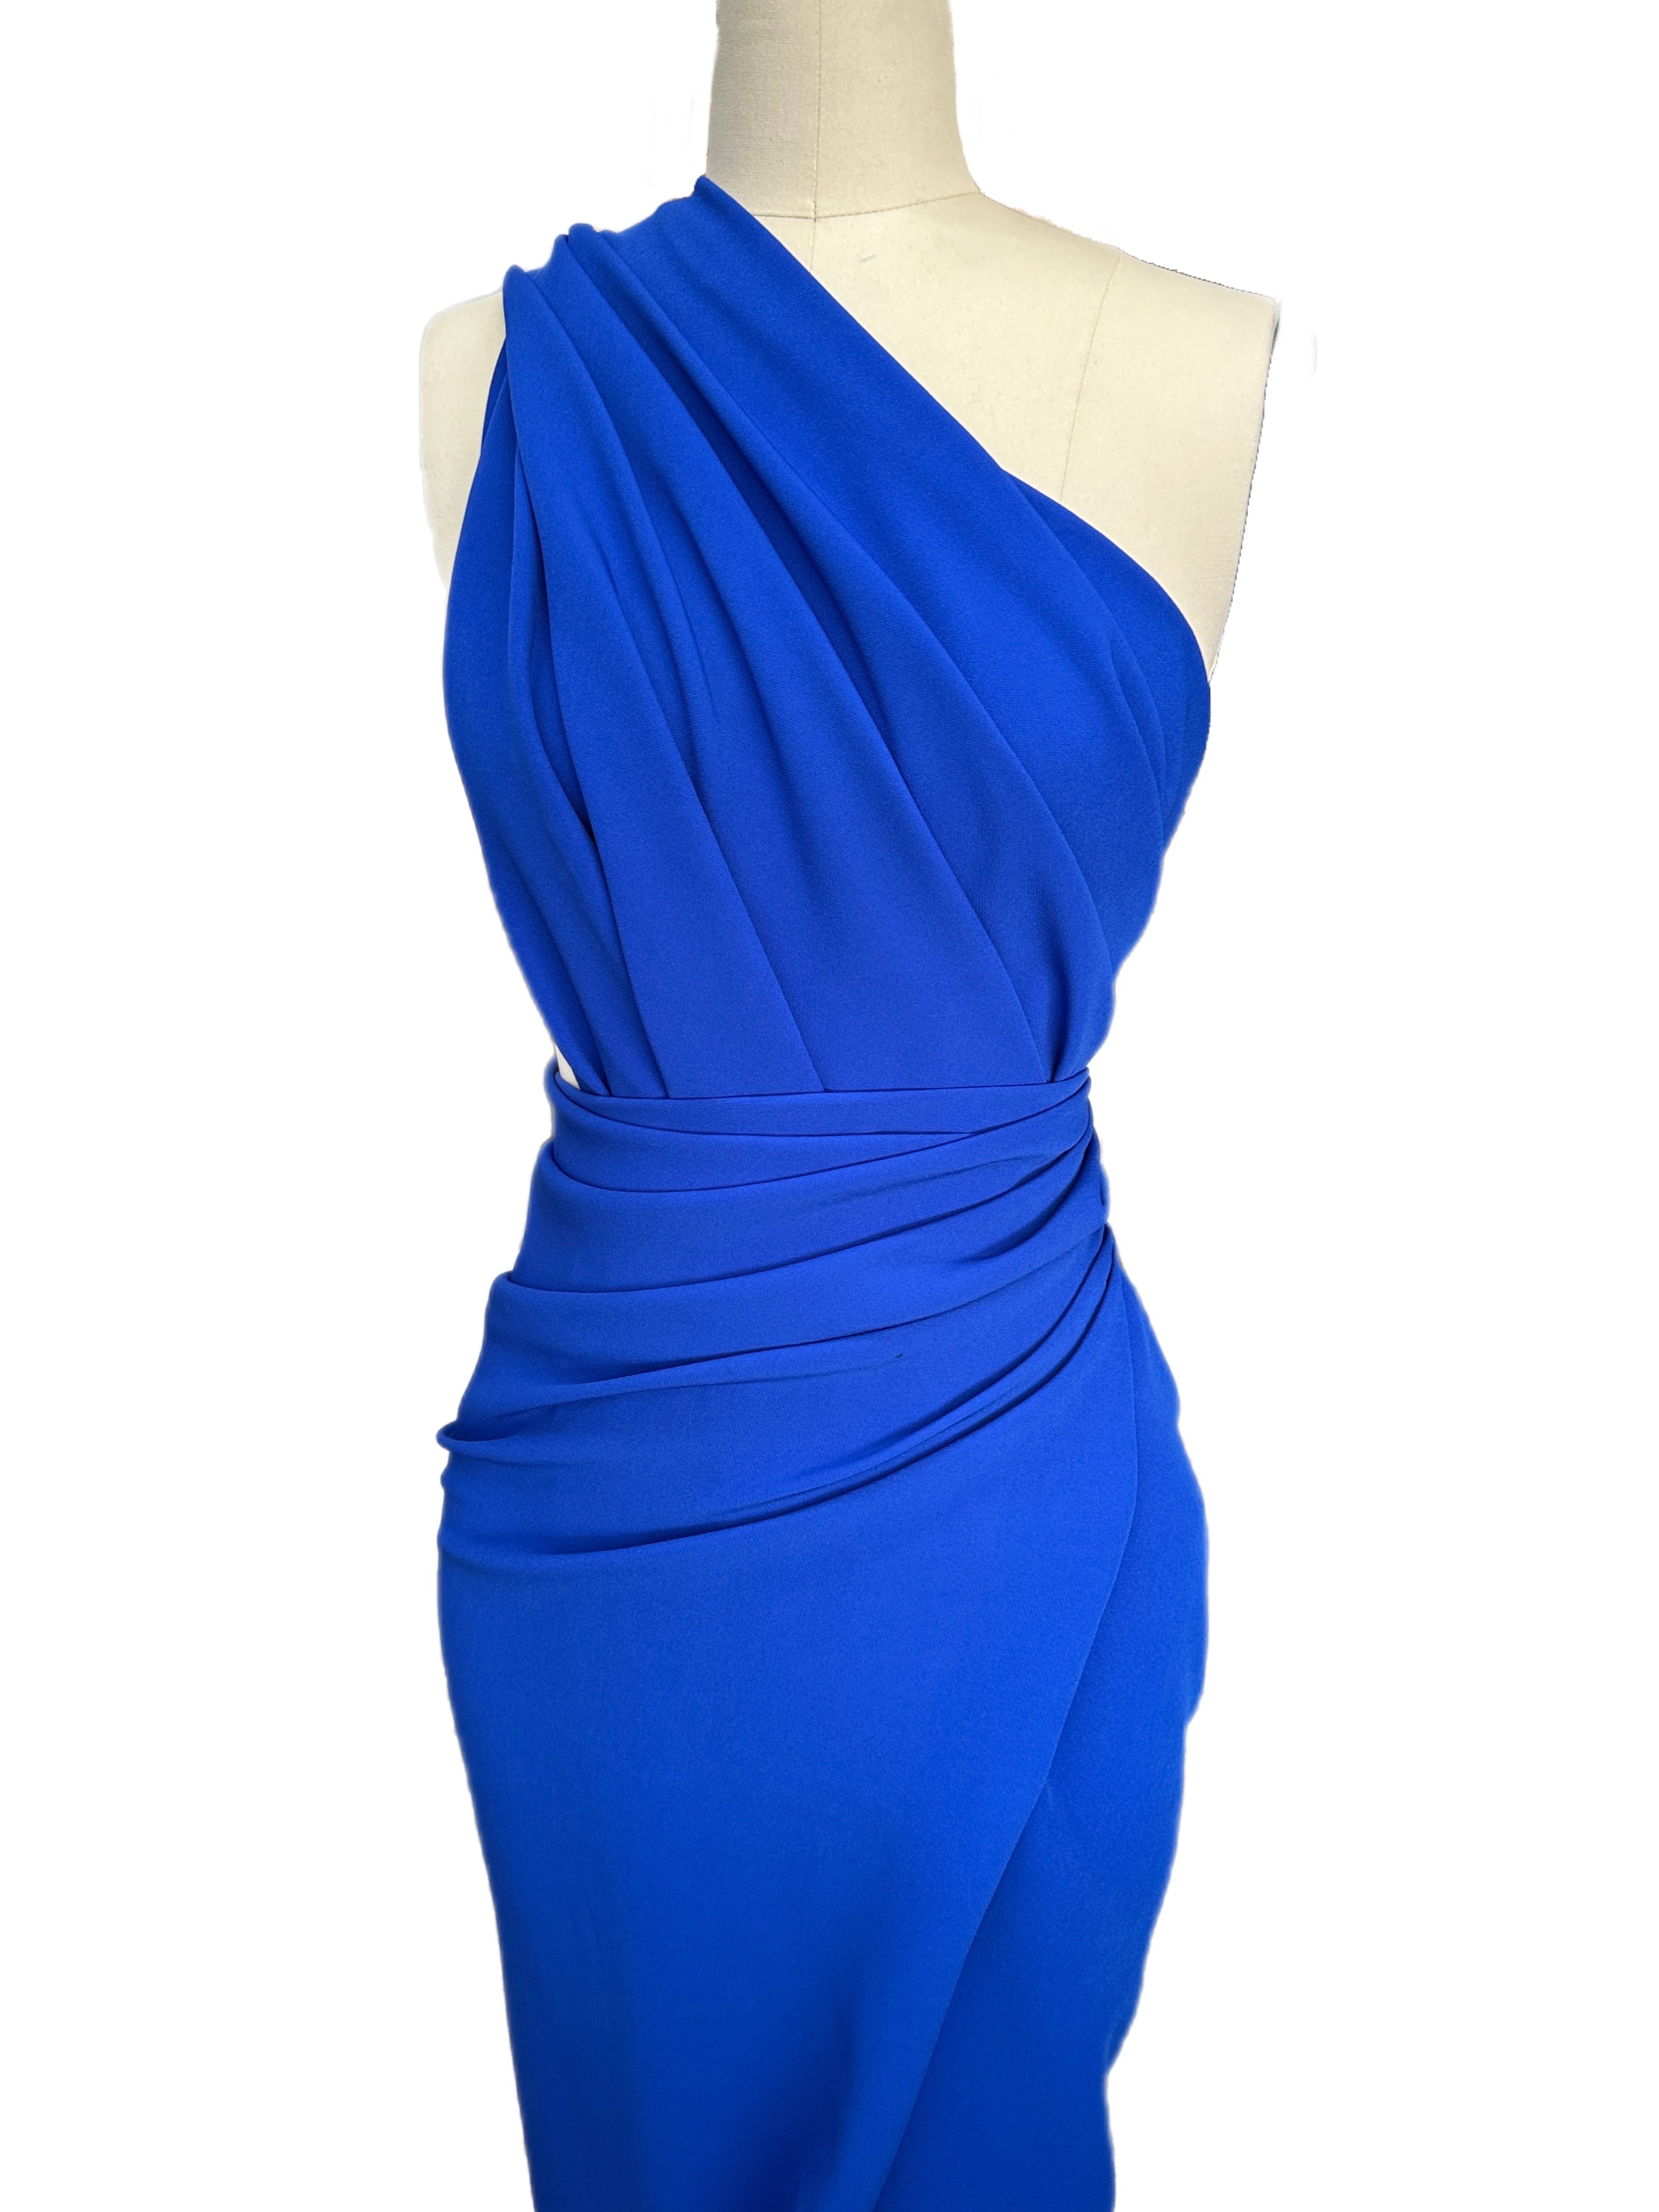 royal blue fabric, light blue crepe, dark blue crepe, crepe for woman, polyester crepe material, Royal Blue Stretch Crepe, crepe fabric by the yard, bridal crepe, crepe clothing material, crepe on sale, bridal fabric, crepe on sale, stretch crepe, crepe for dress		